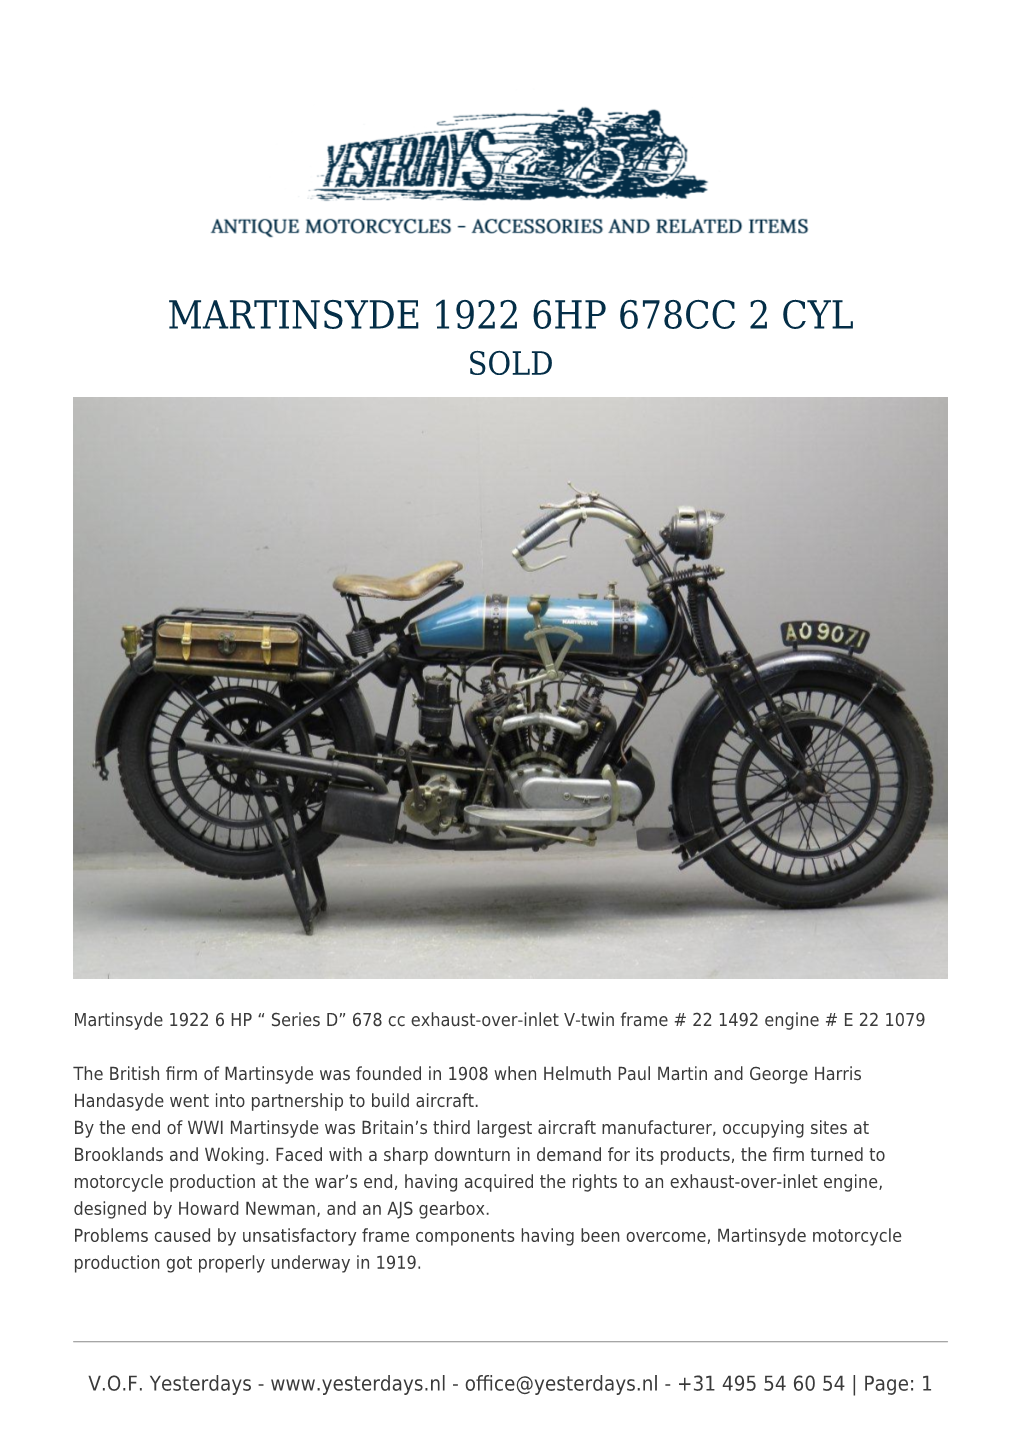 Martinsyde 1922 6Hp 678Cc 2 Cyl Sold